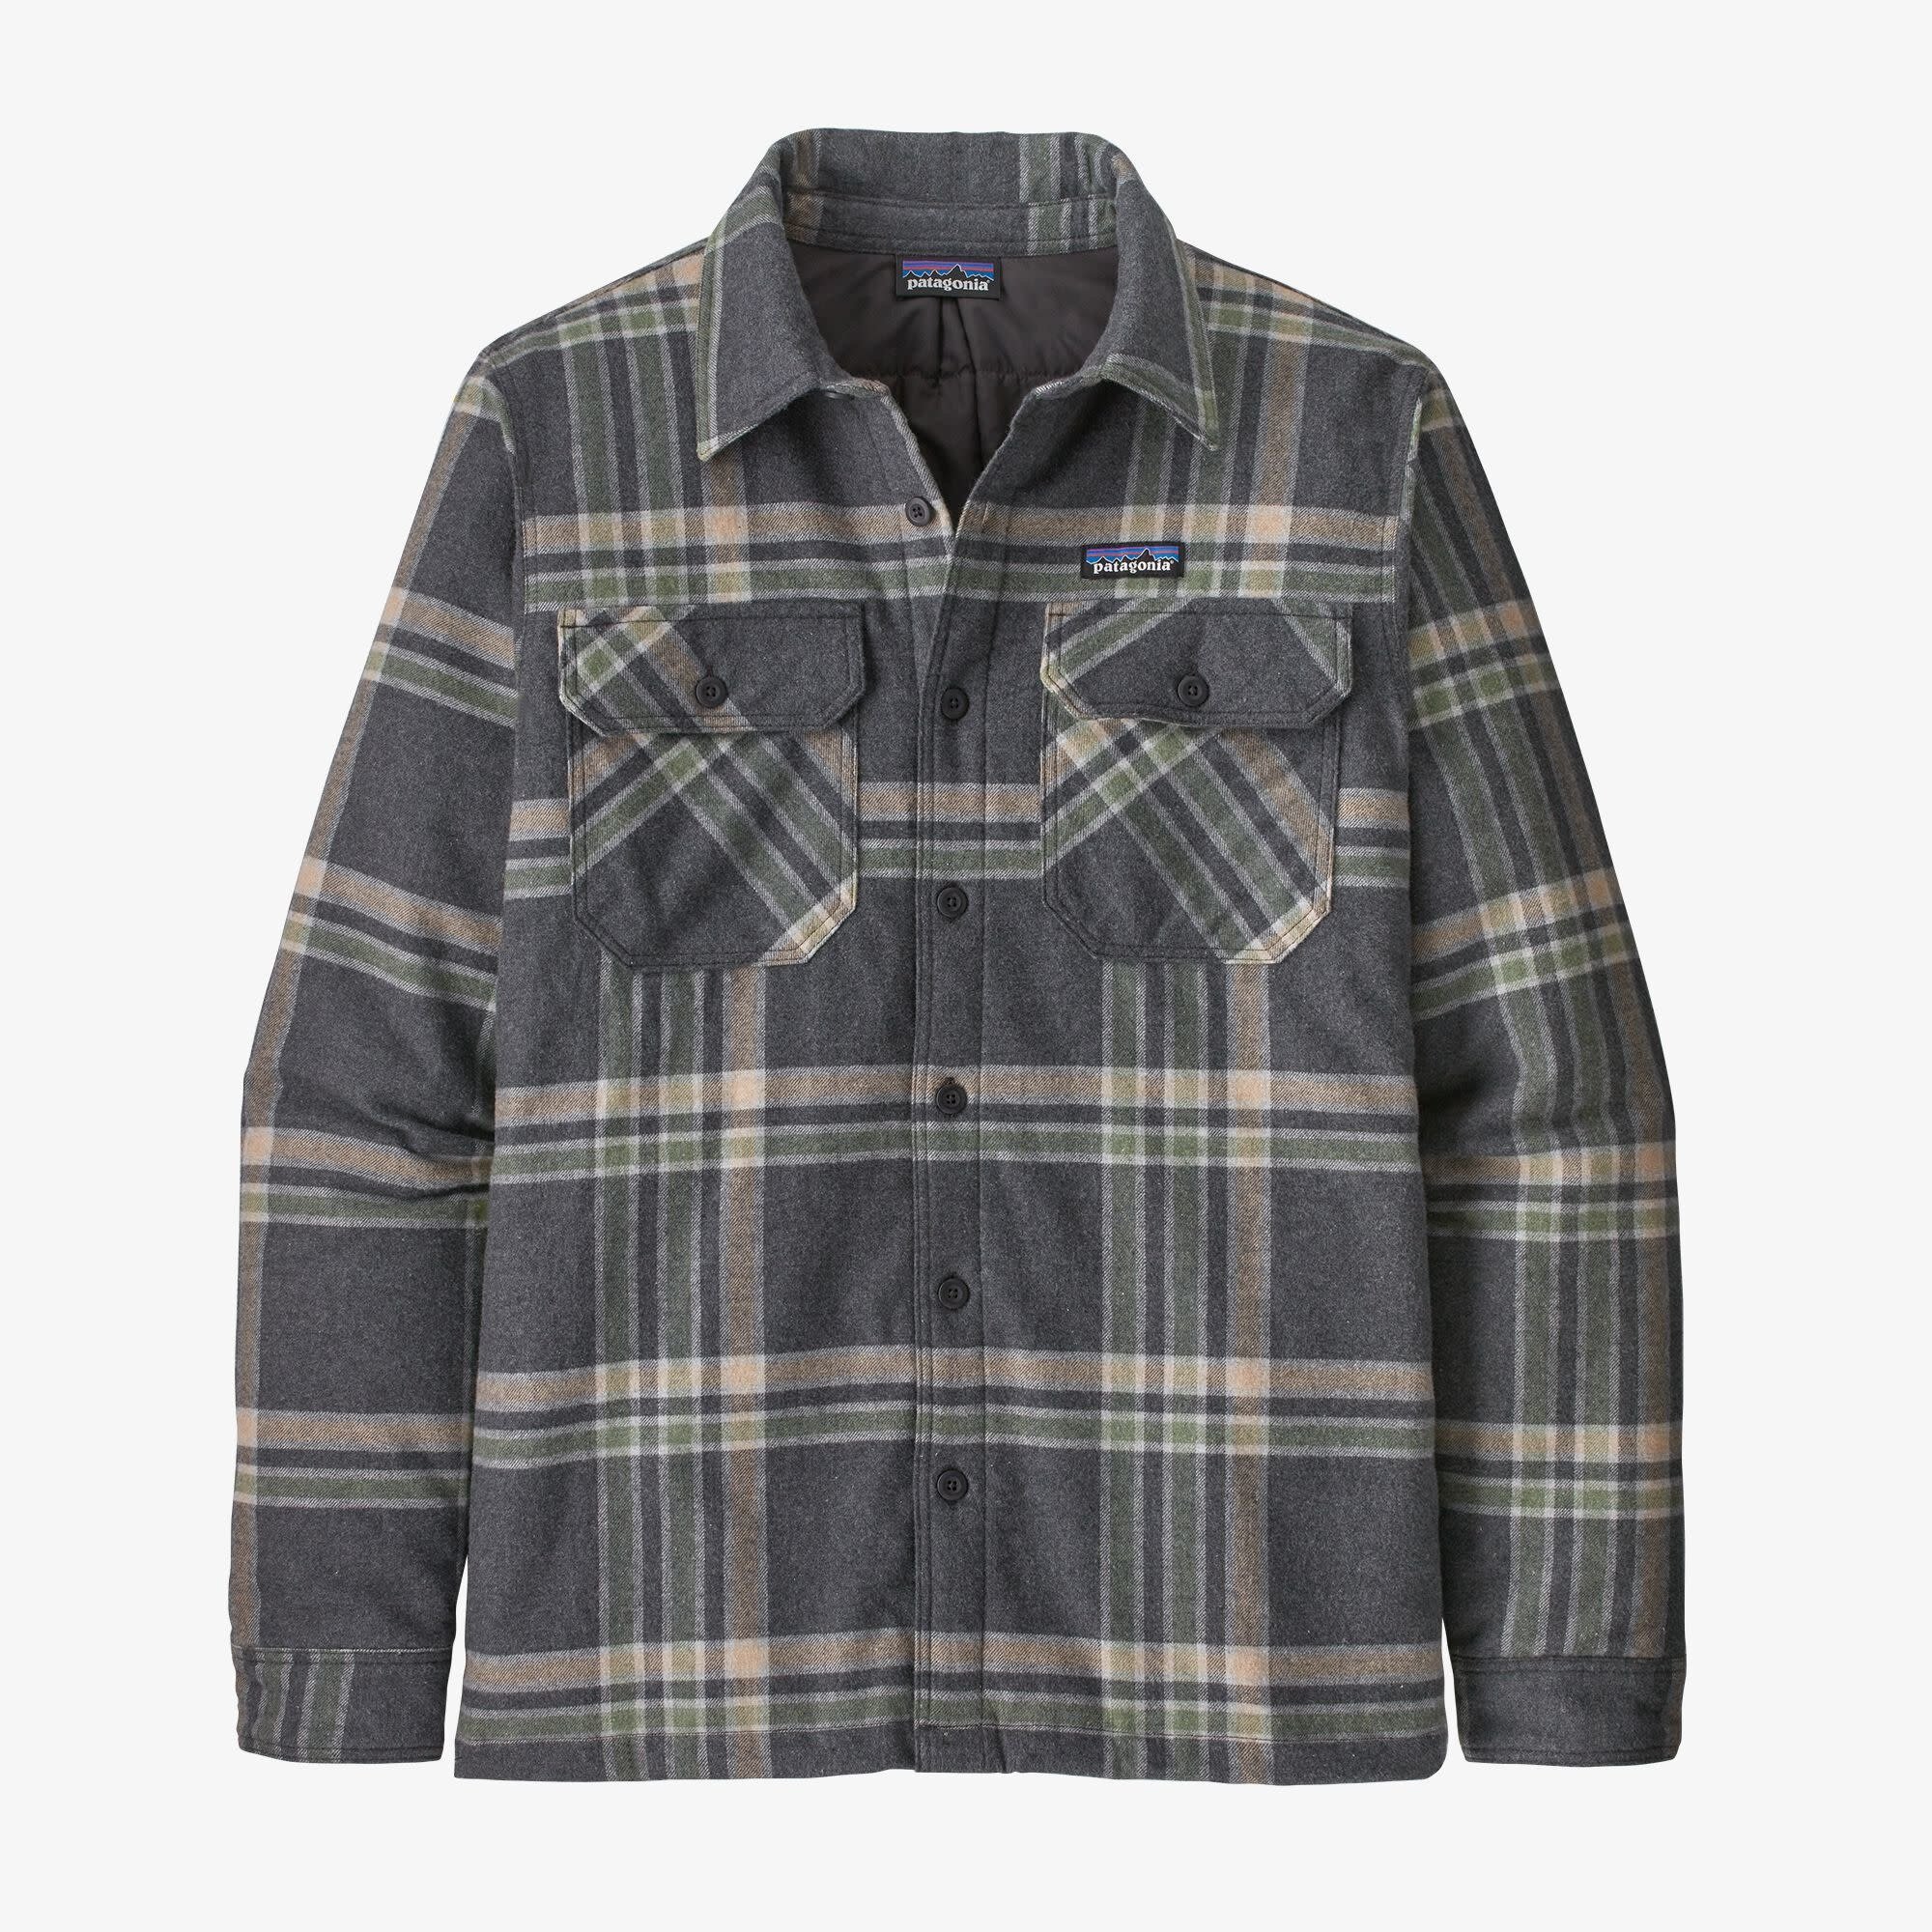 Patagonia Patagonia M's Insulated Fjord Flannel Jacket